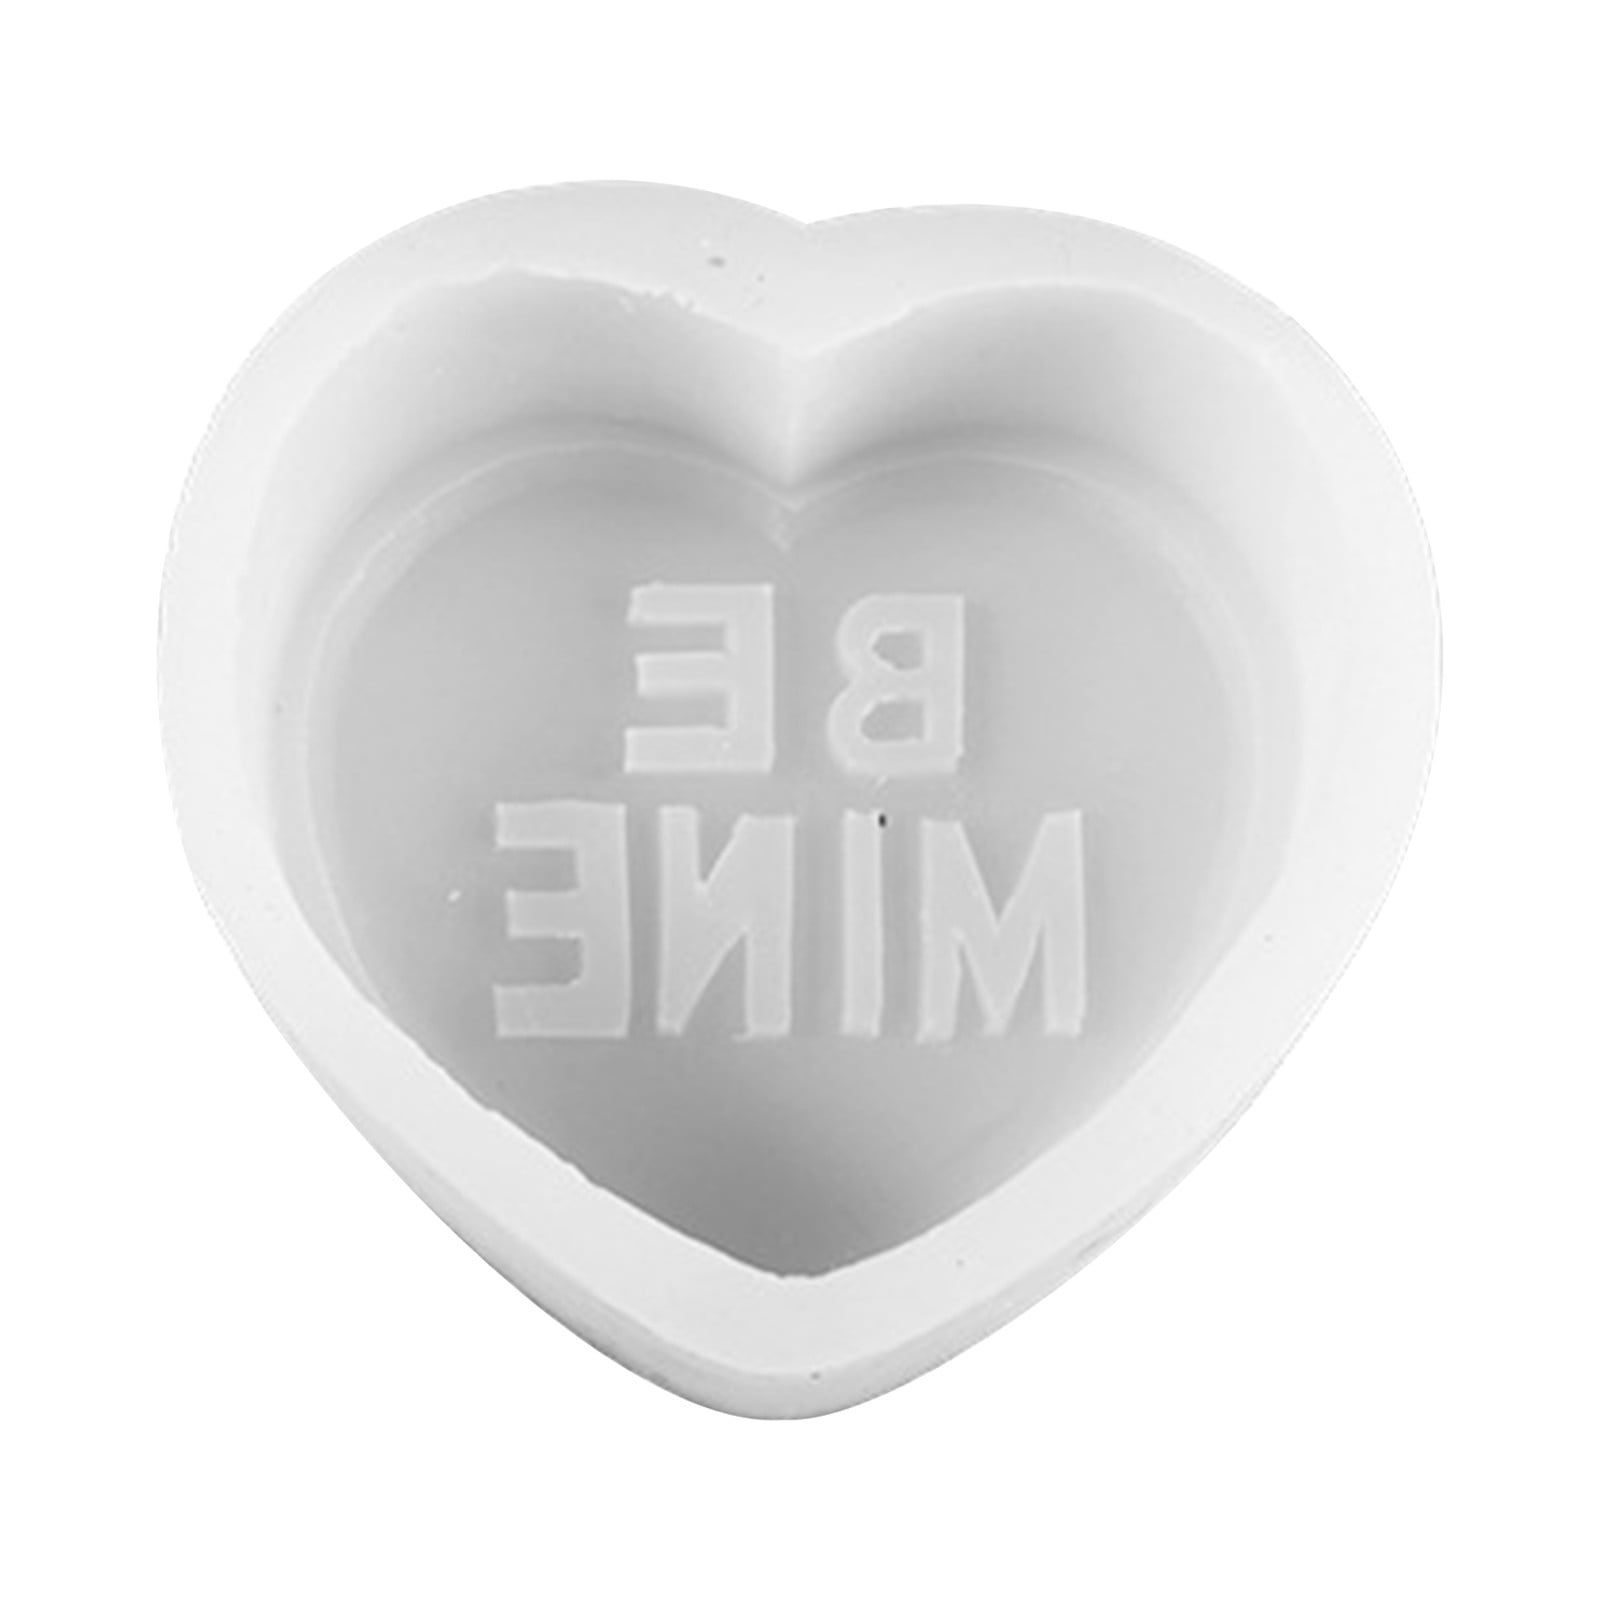 Visland Creative 3D Letters Love Silicone Candle Mold DIY Heart Candle Making Resin Soap Mold Valentine's Day Gift Home Decor Craft, True Love